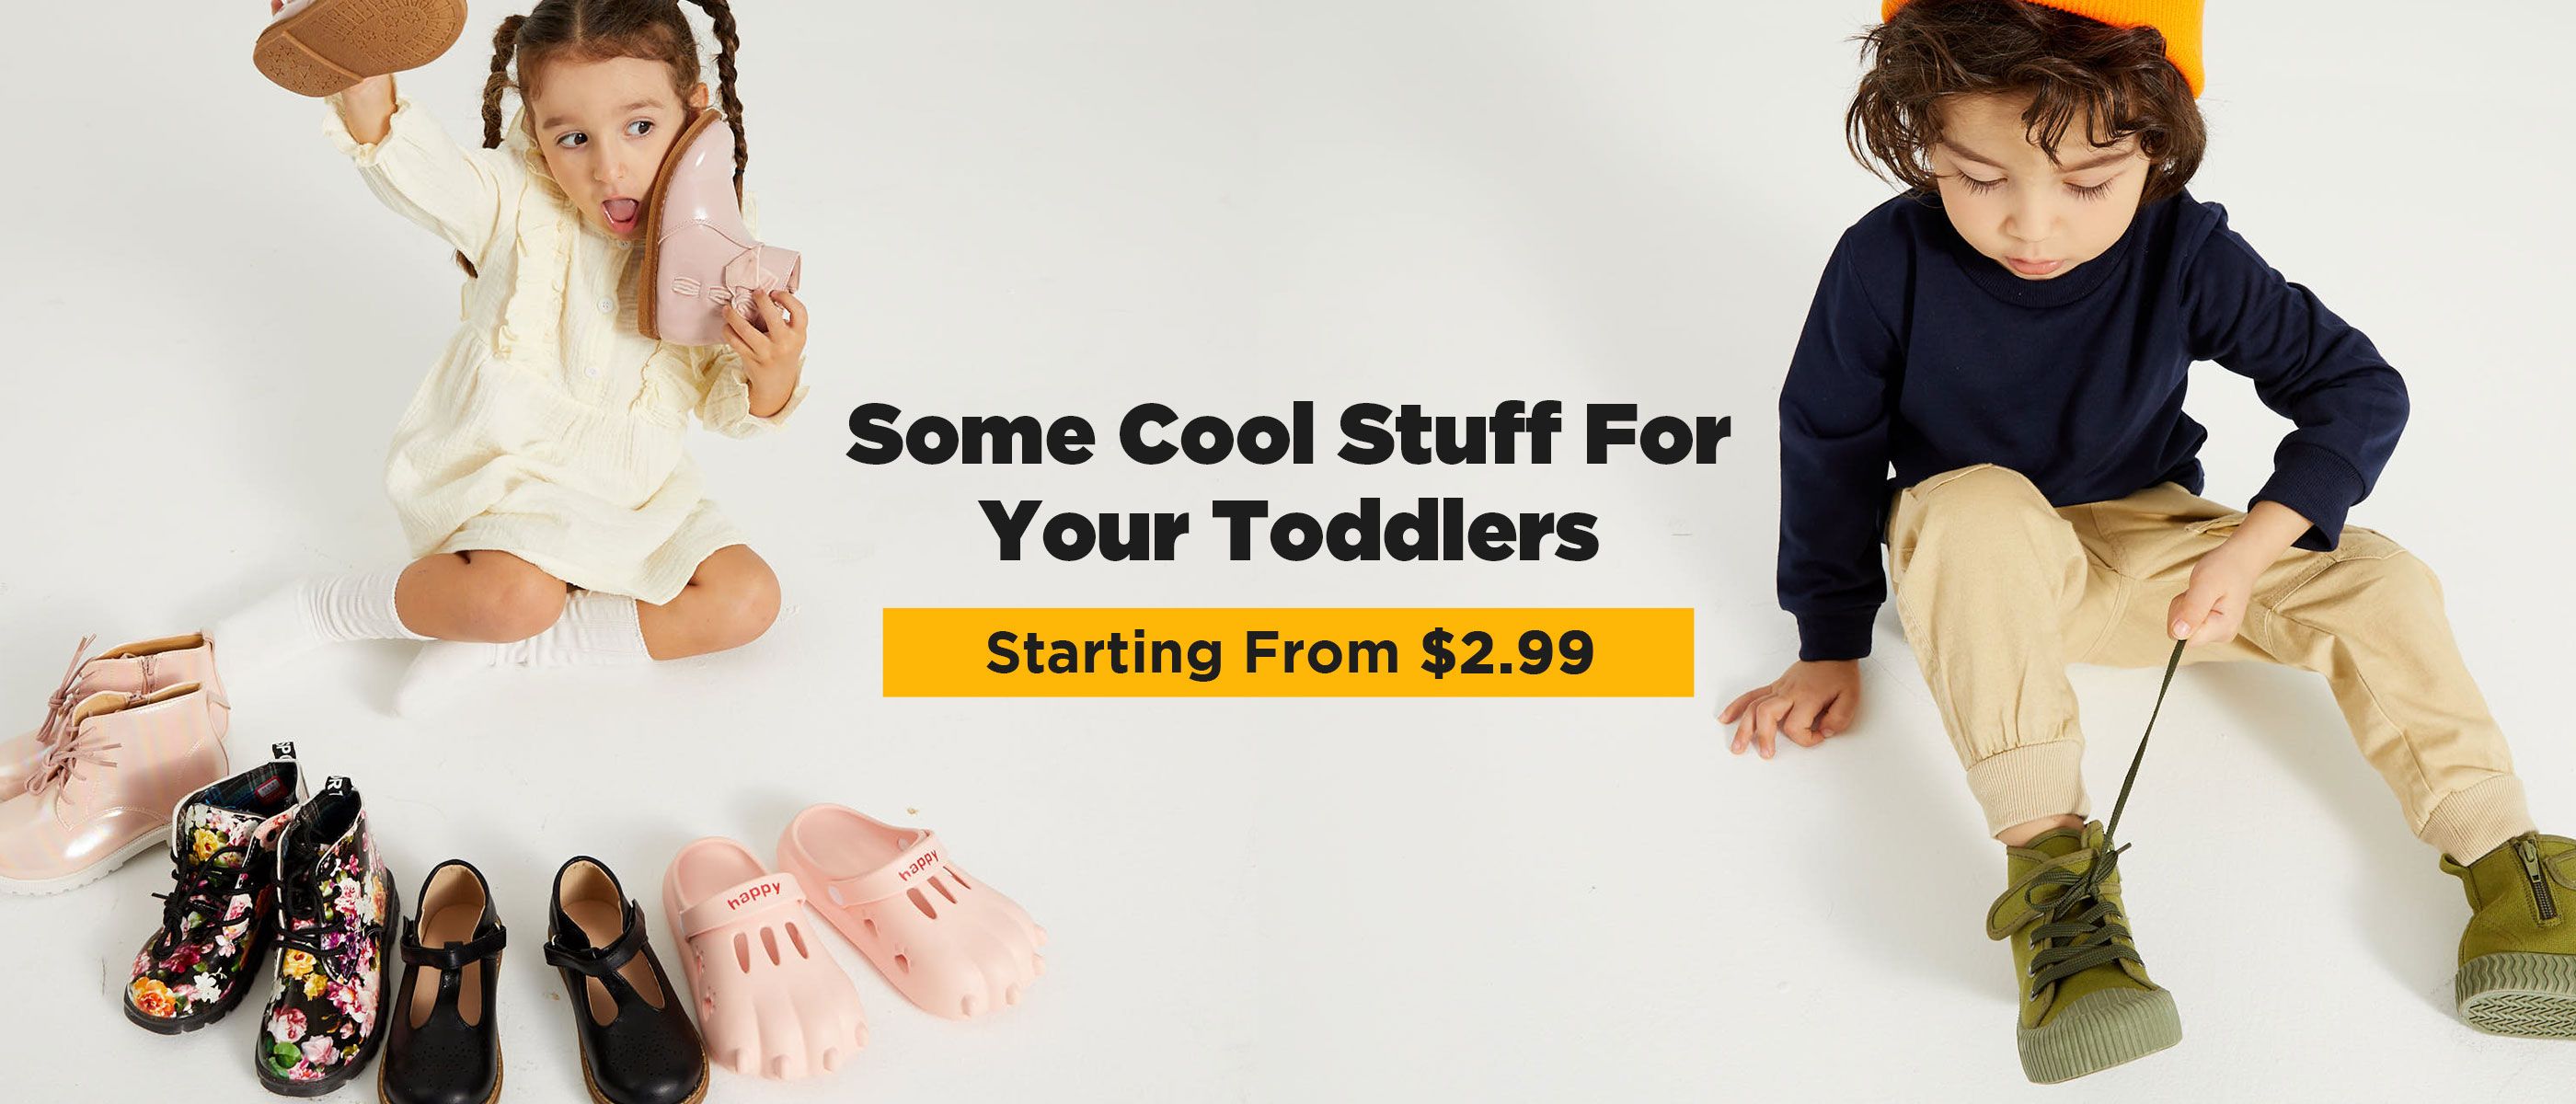 Some Cool Stuff For Your Toddlers